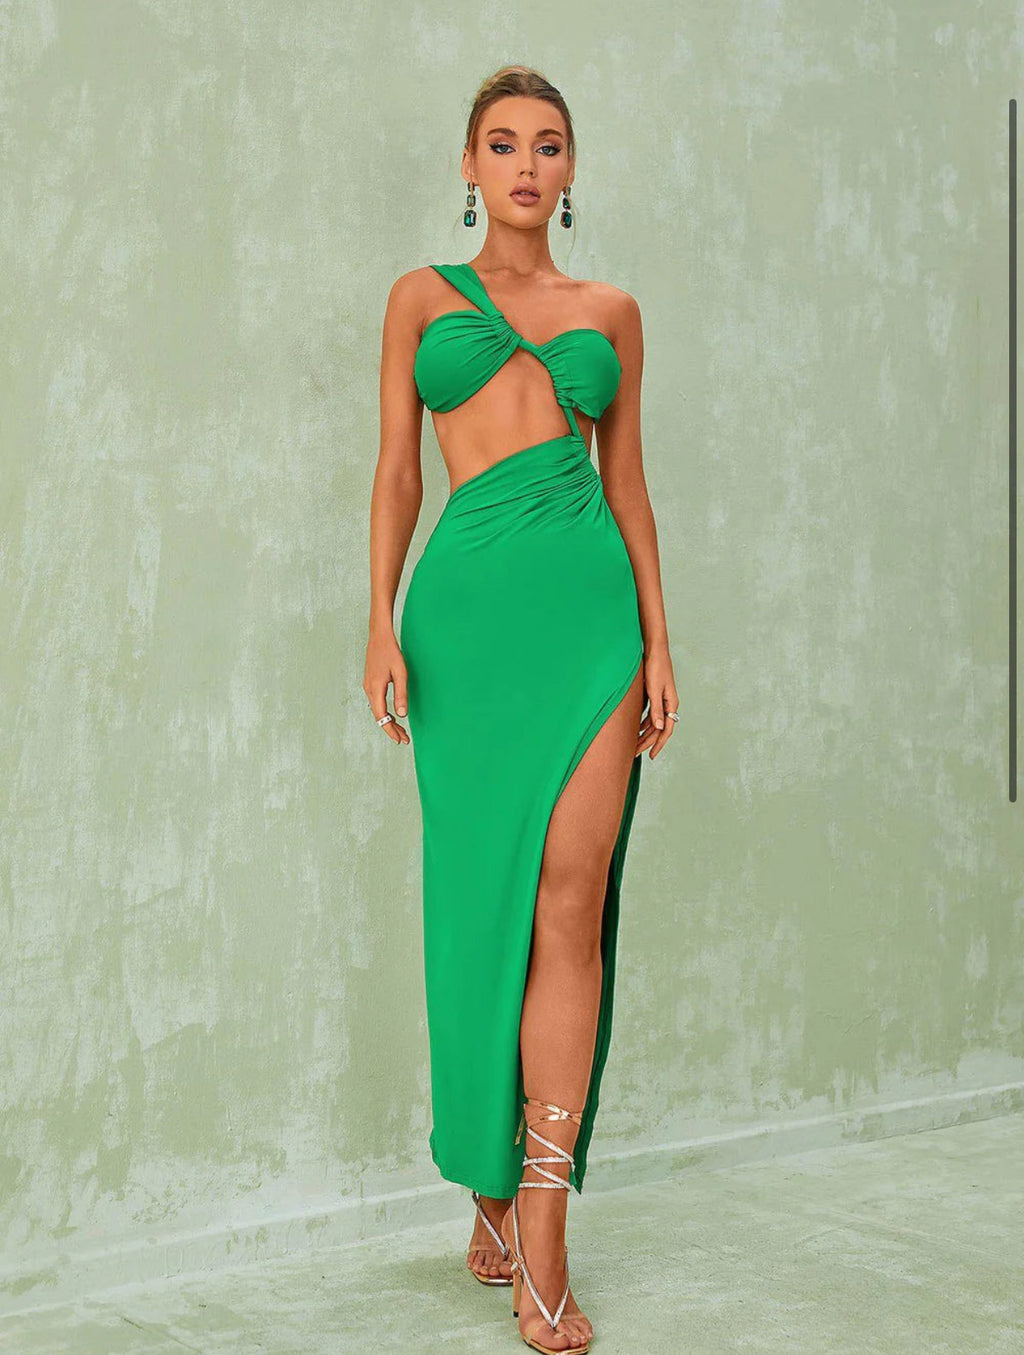 NEXT DAY DELIVERY UMOJA One Shoulder Cut Out Maxci Bodycon Dress